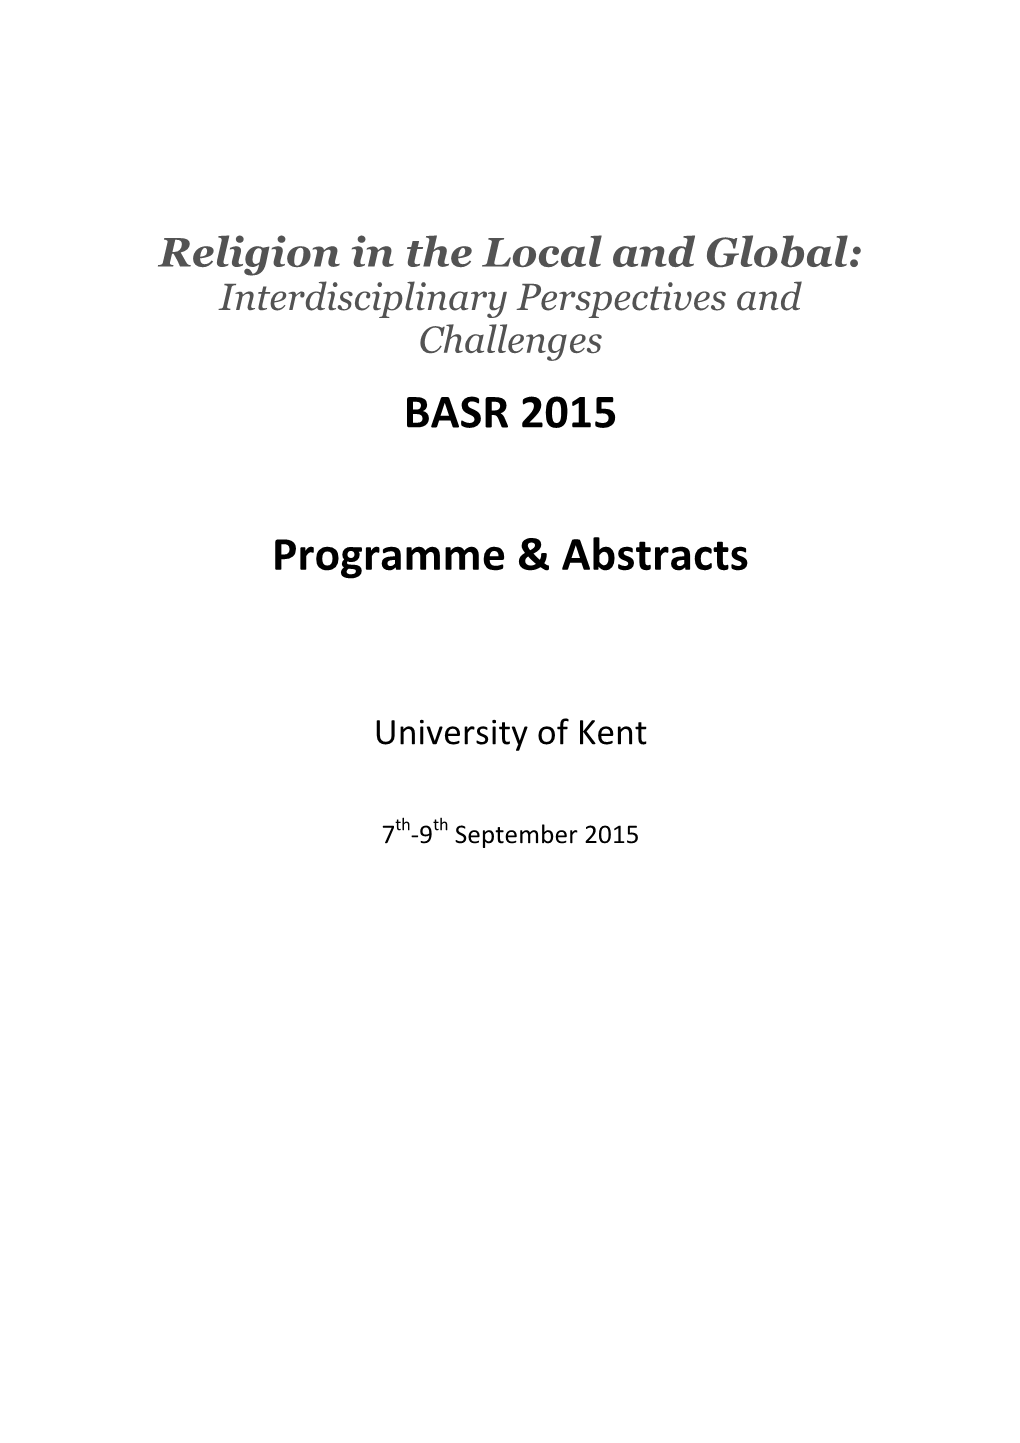 BASR 2015 Programme & Abstracts